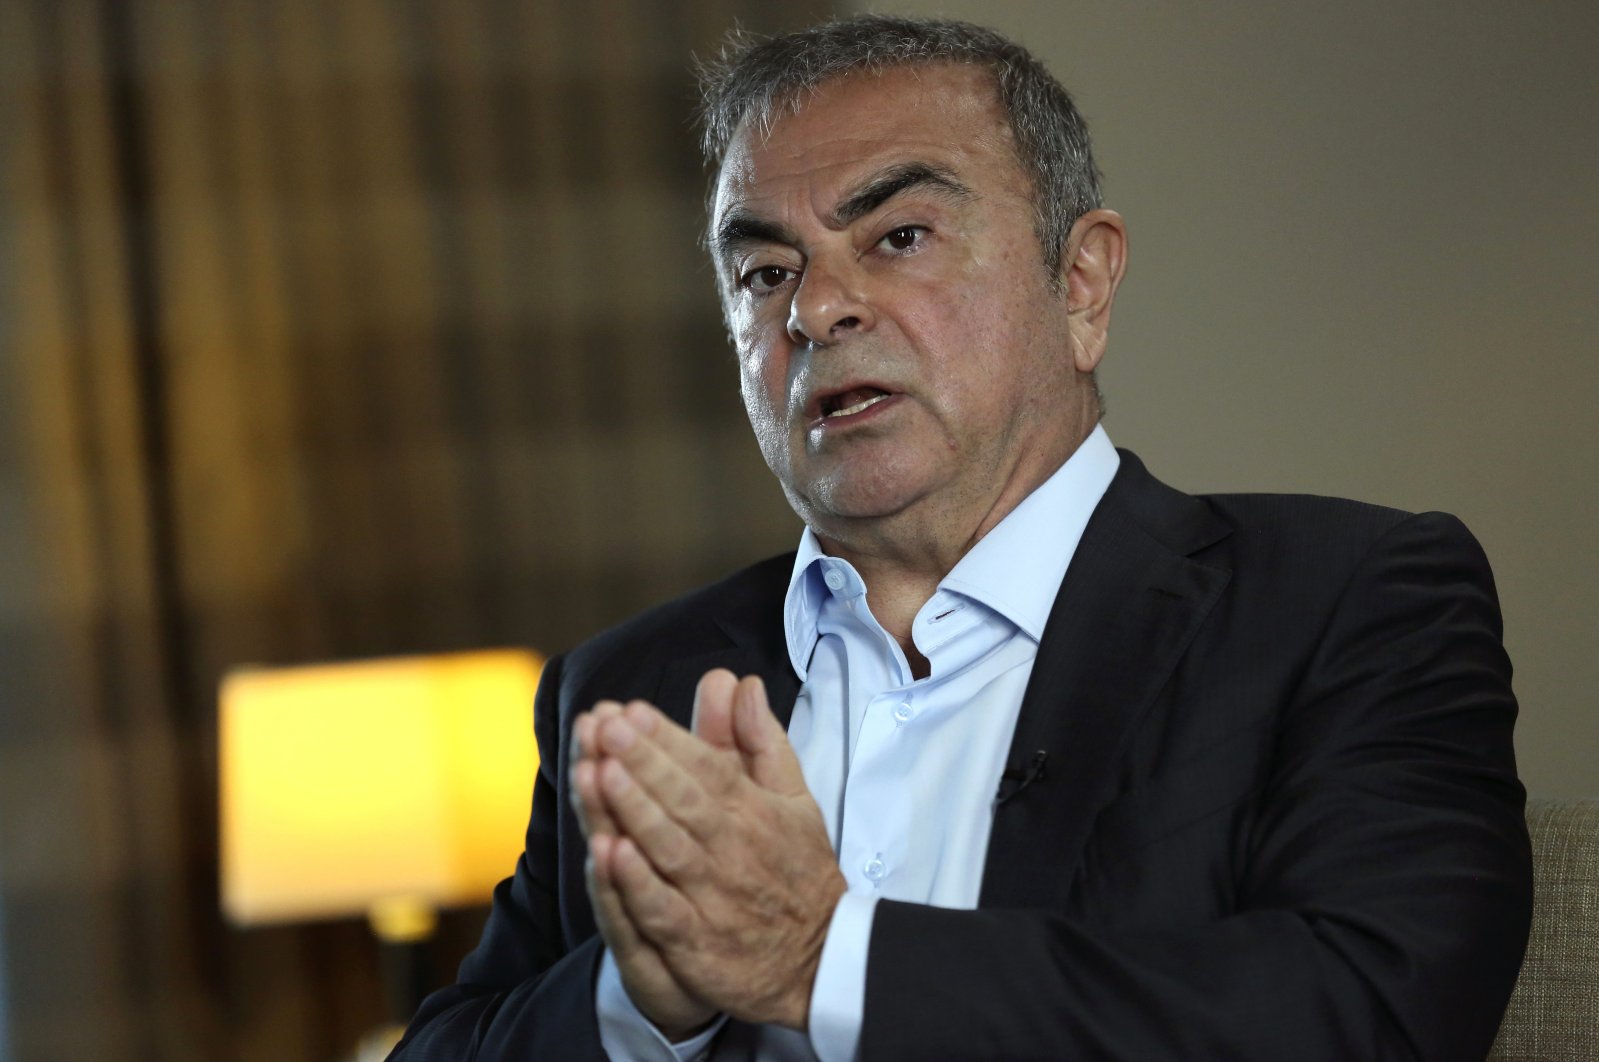 Nissan's former chairperson Carlos Ghosn speaks during an interview, in Dbayeh, north of Beirut, Lebanon, May 25, 2021.